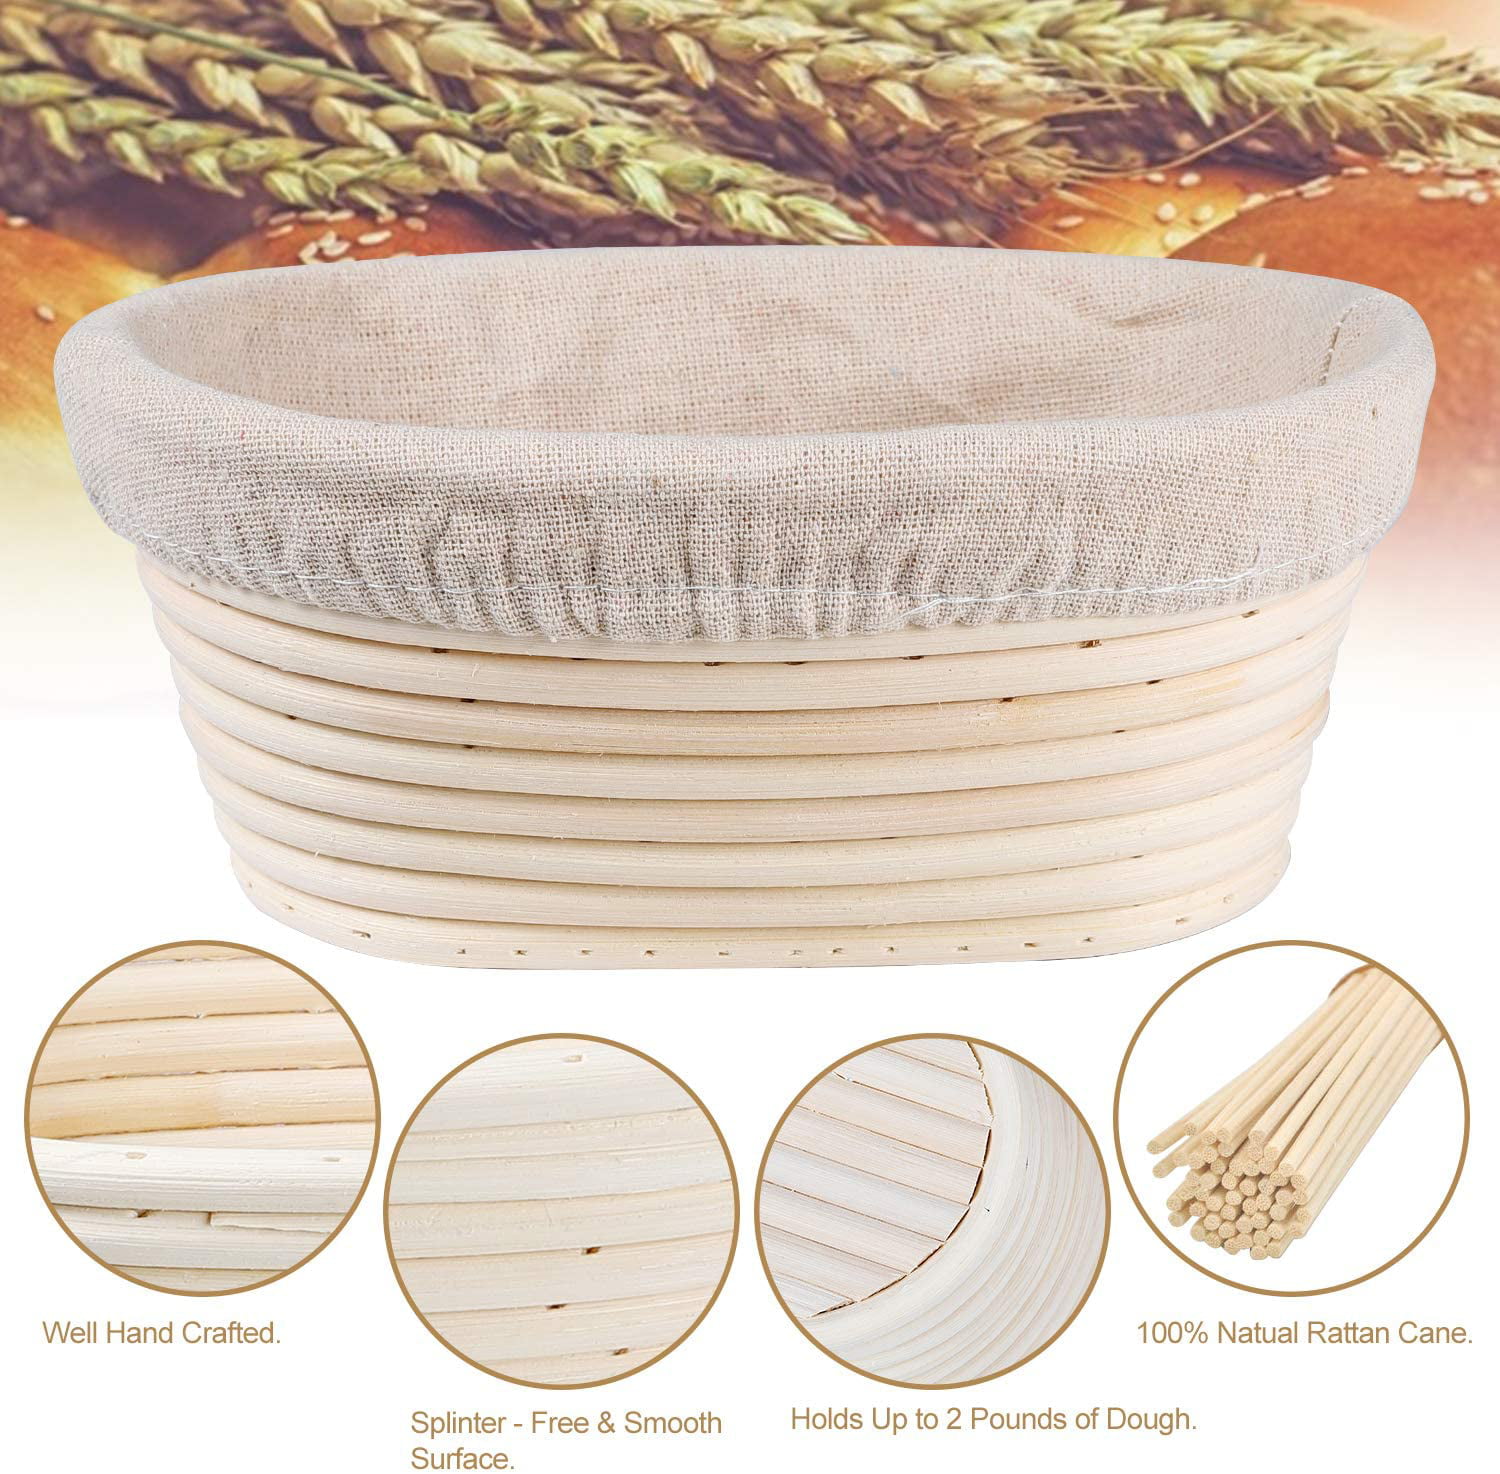 Wicker Cane Oval, for 1.5 & 2.2 lb of Sourdough Banneton Bread Proofing Basket Set of 2 Stainl Scraper Steel-Clamped w/Covering Natural Fermentation Baskets